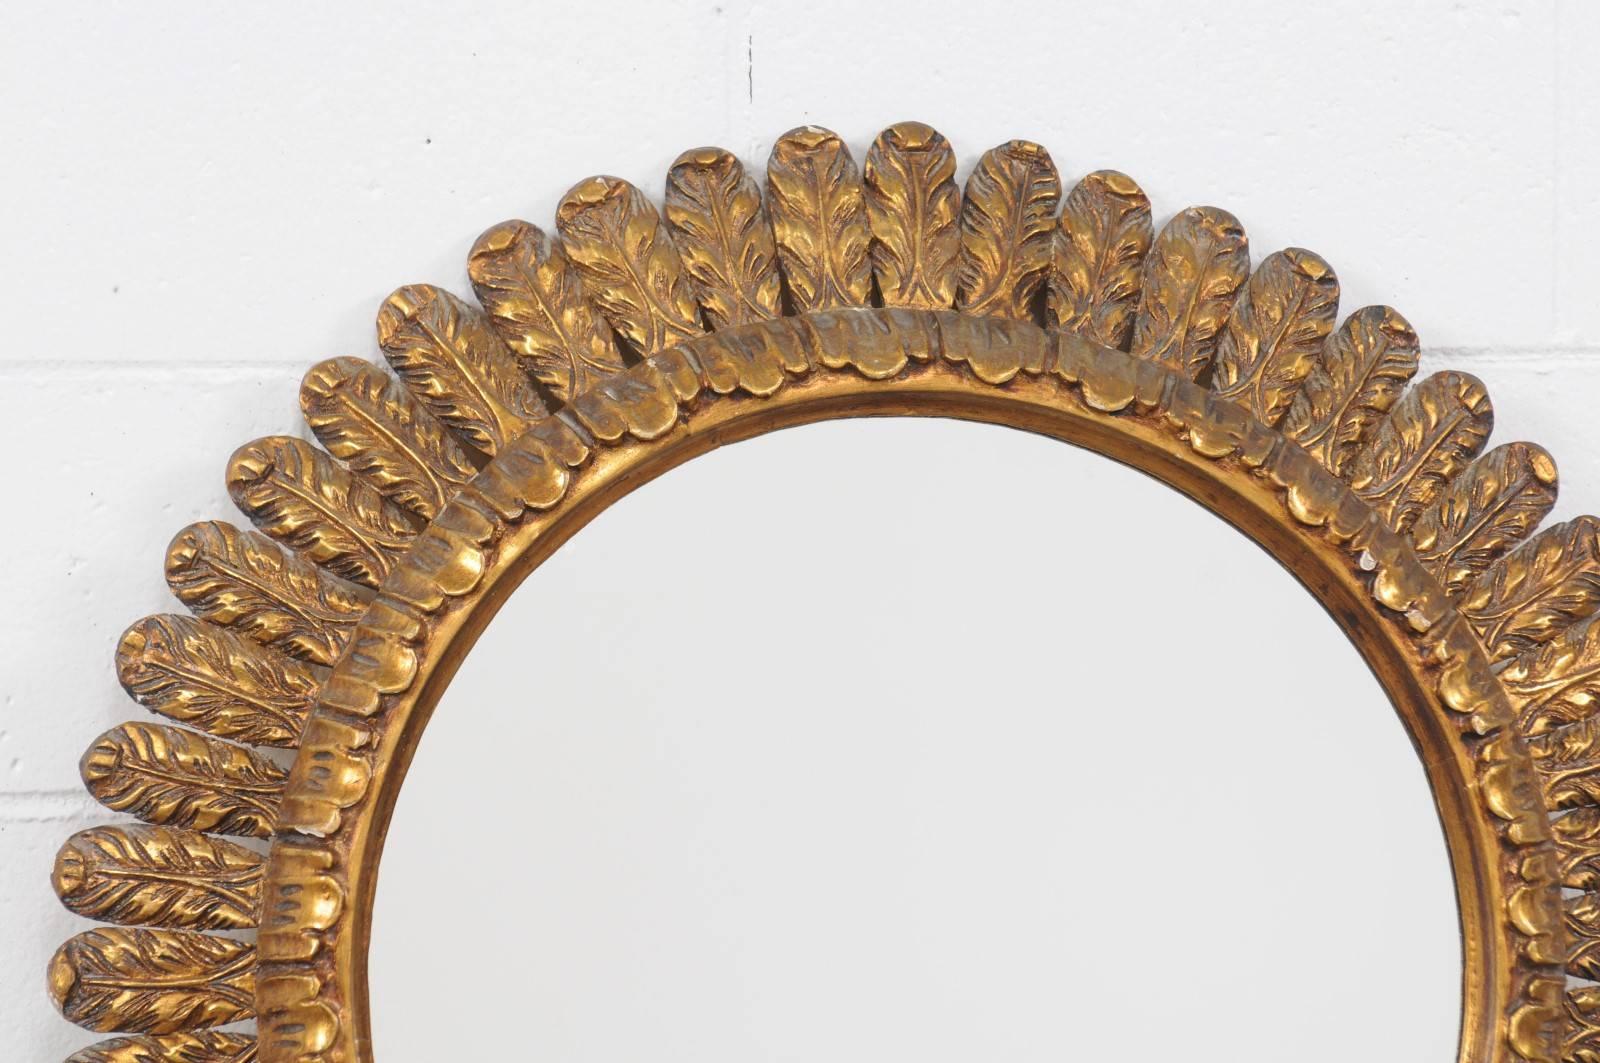 20th Century French Vintage Giltwood Sunburst Mirror with Waterleaves from the Midcentury